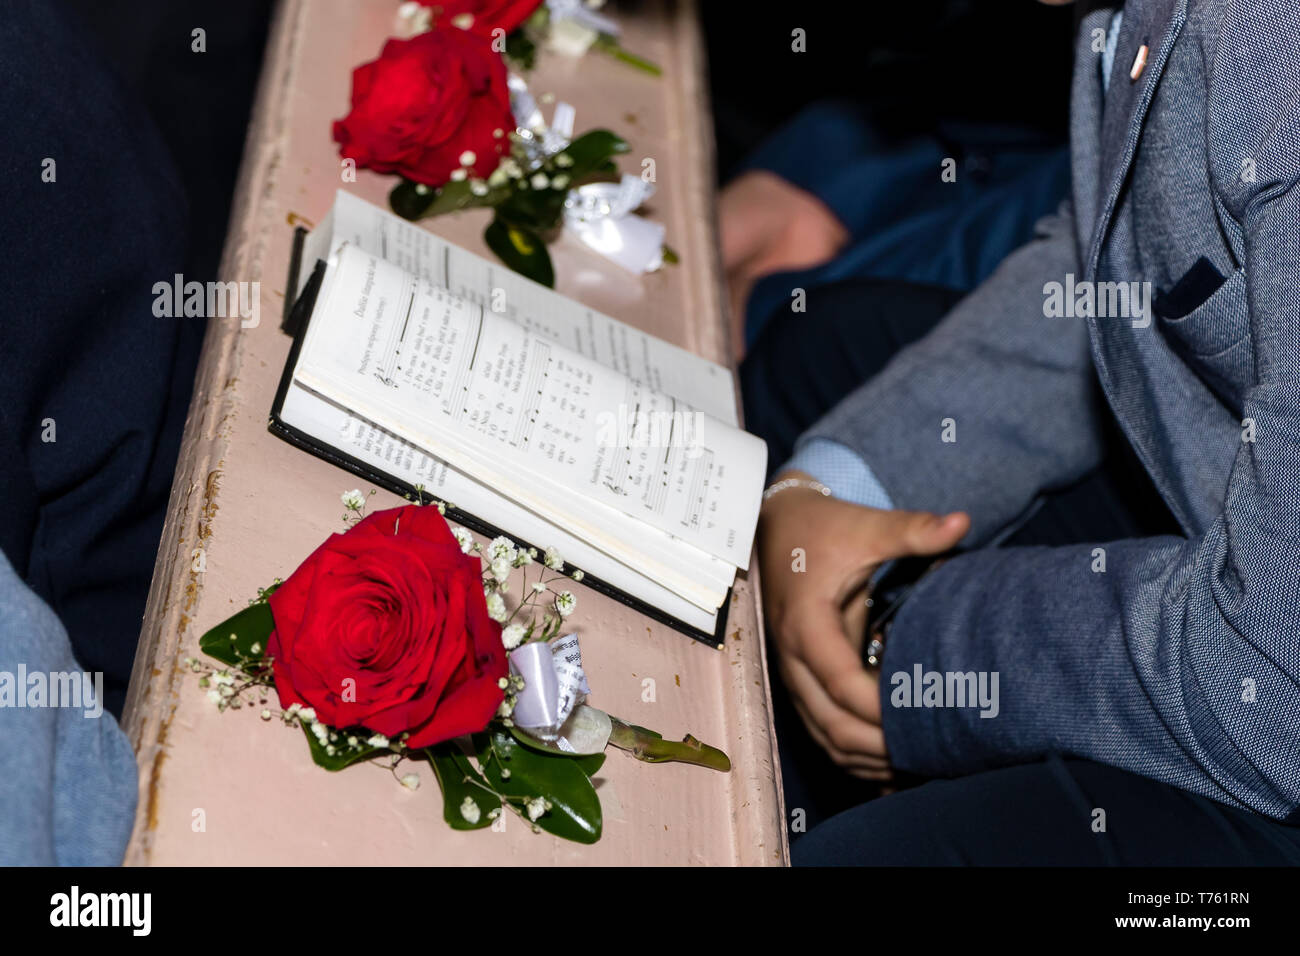 Novi Sad, Serbia - April 28, 2019: The anglican hymn book and red roses in church Stock Photo